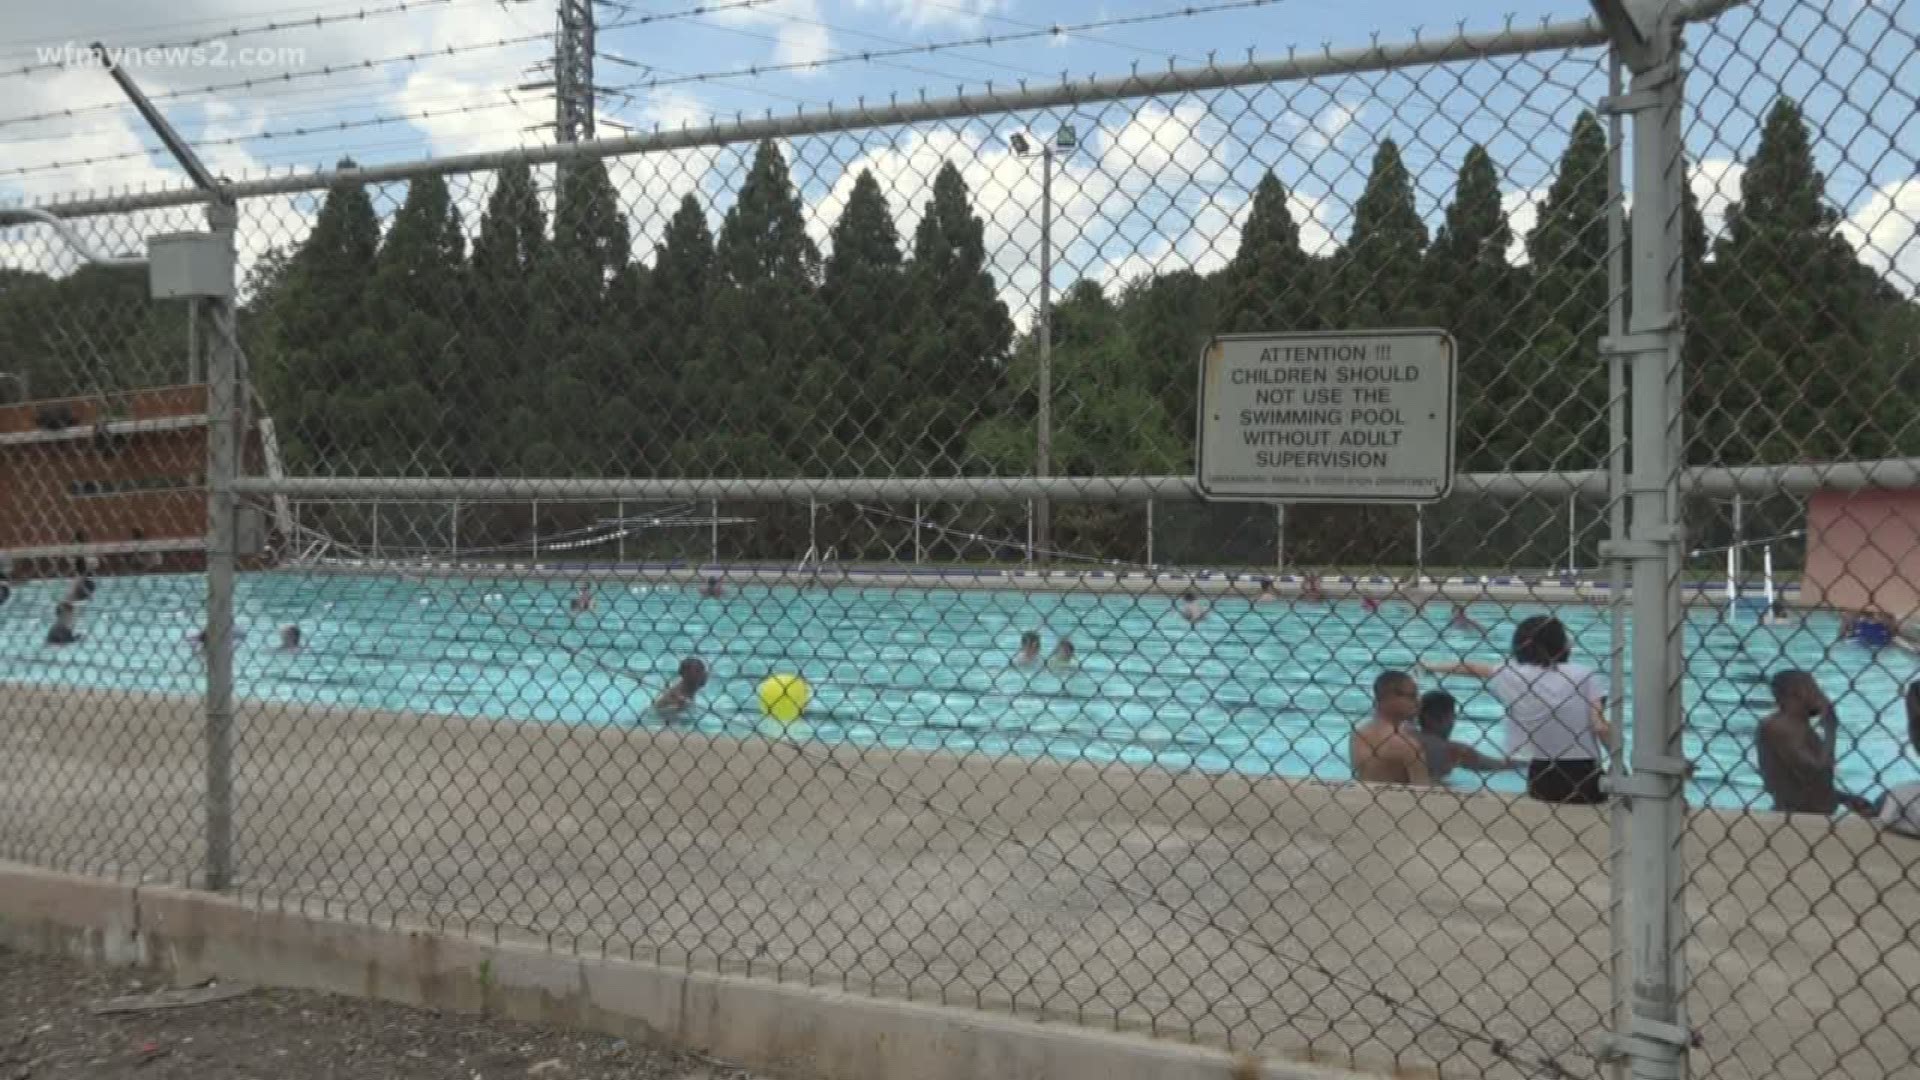 Public health officials are warning people to take precautions and protect themselves against a microscopic parasite which can live for days in swimming pools and water playgrounds.